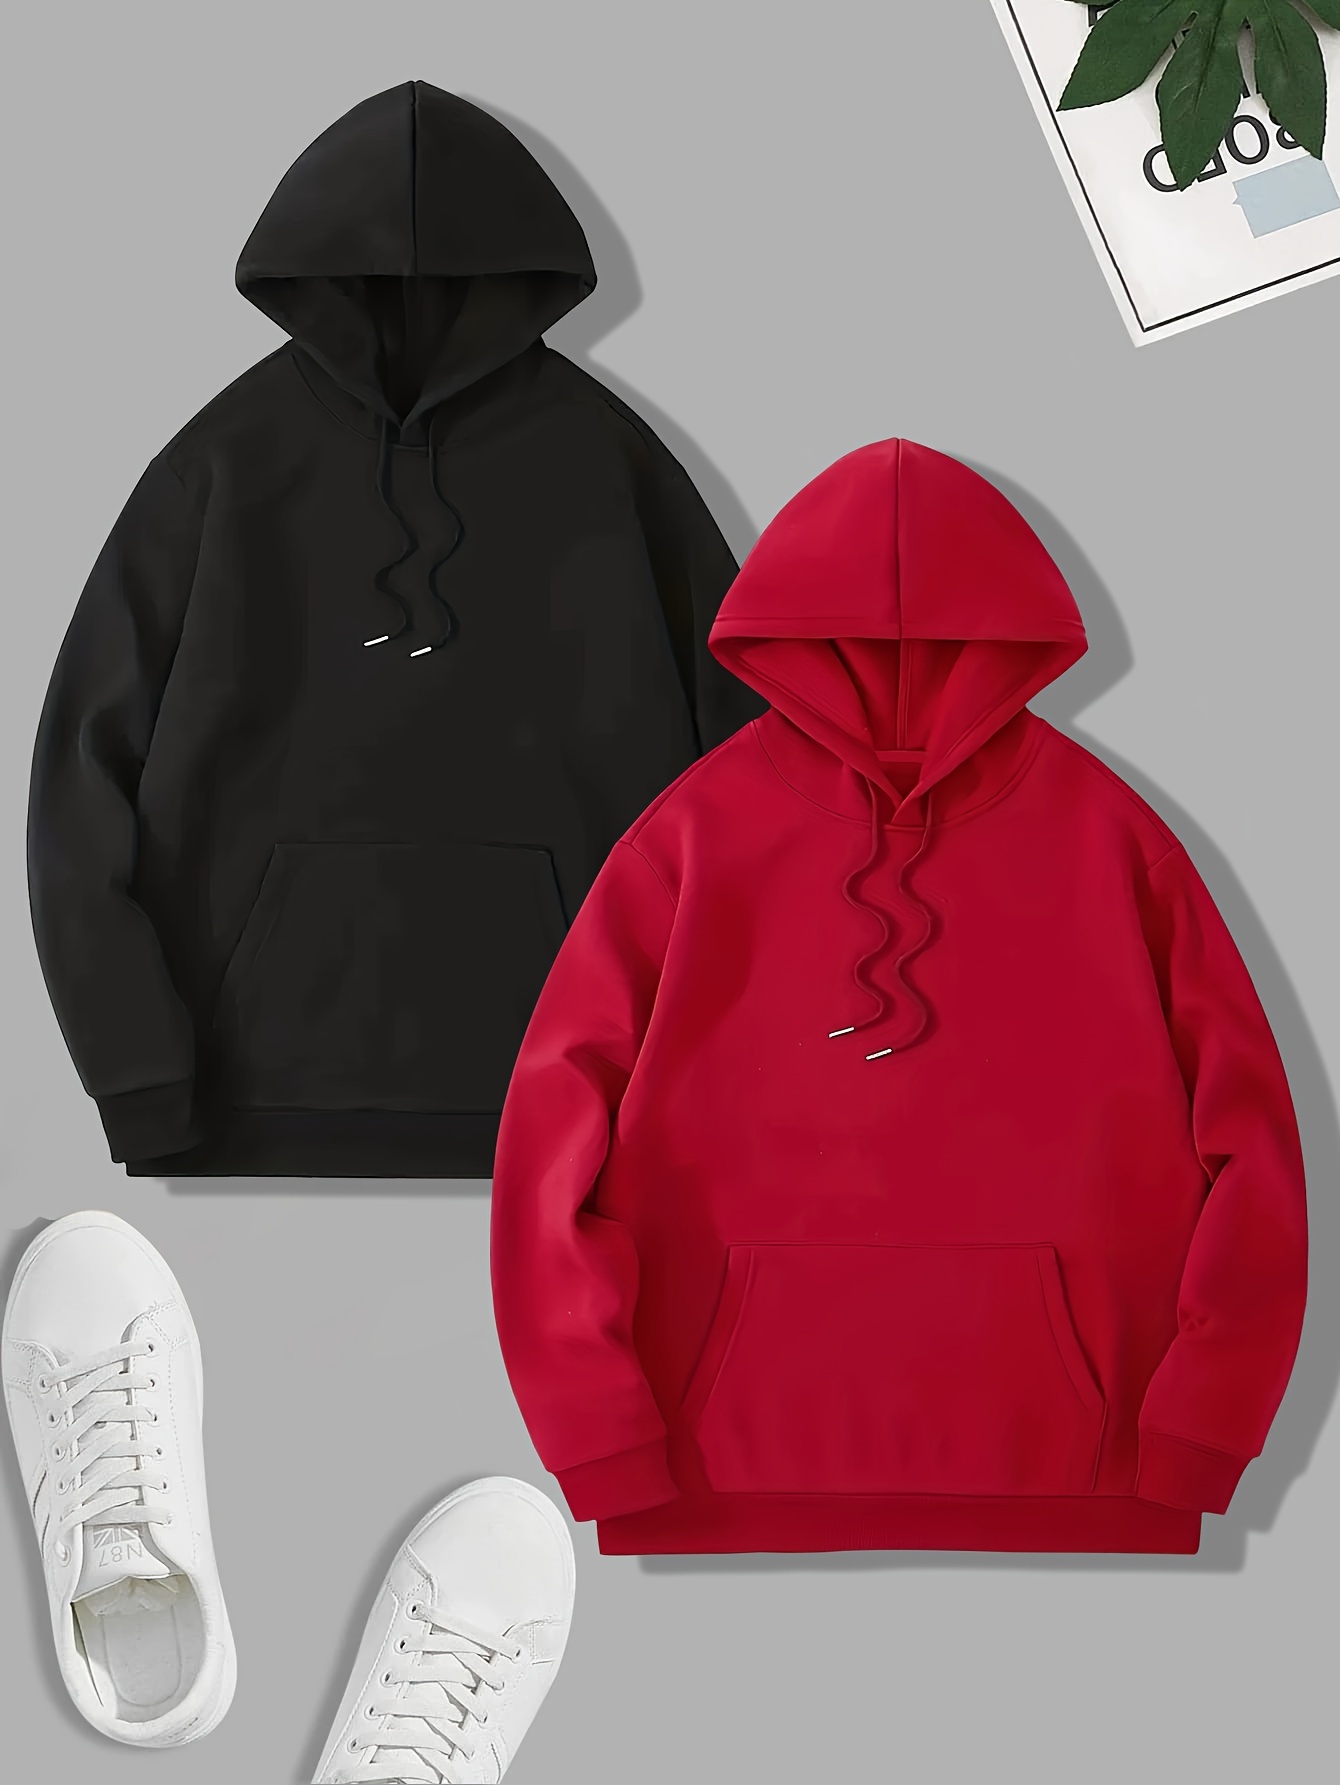 2Pcs Hoodies Set For Men, Men's Casual Solid Basic Hooded Sweatshirt Streetwear For Winter Fall, As Gifts